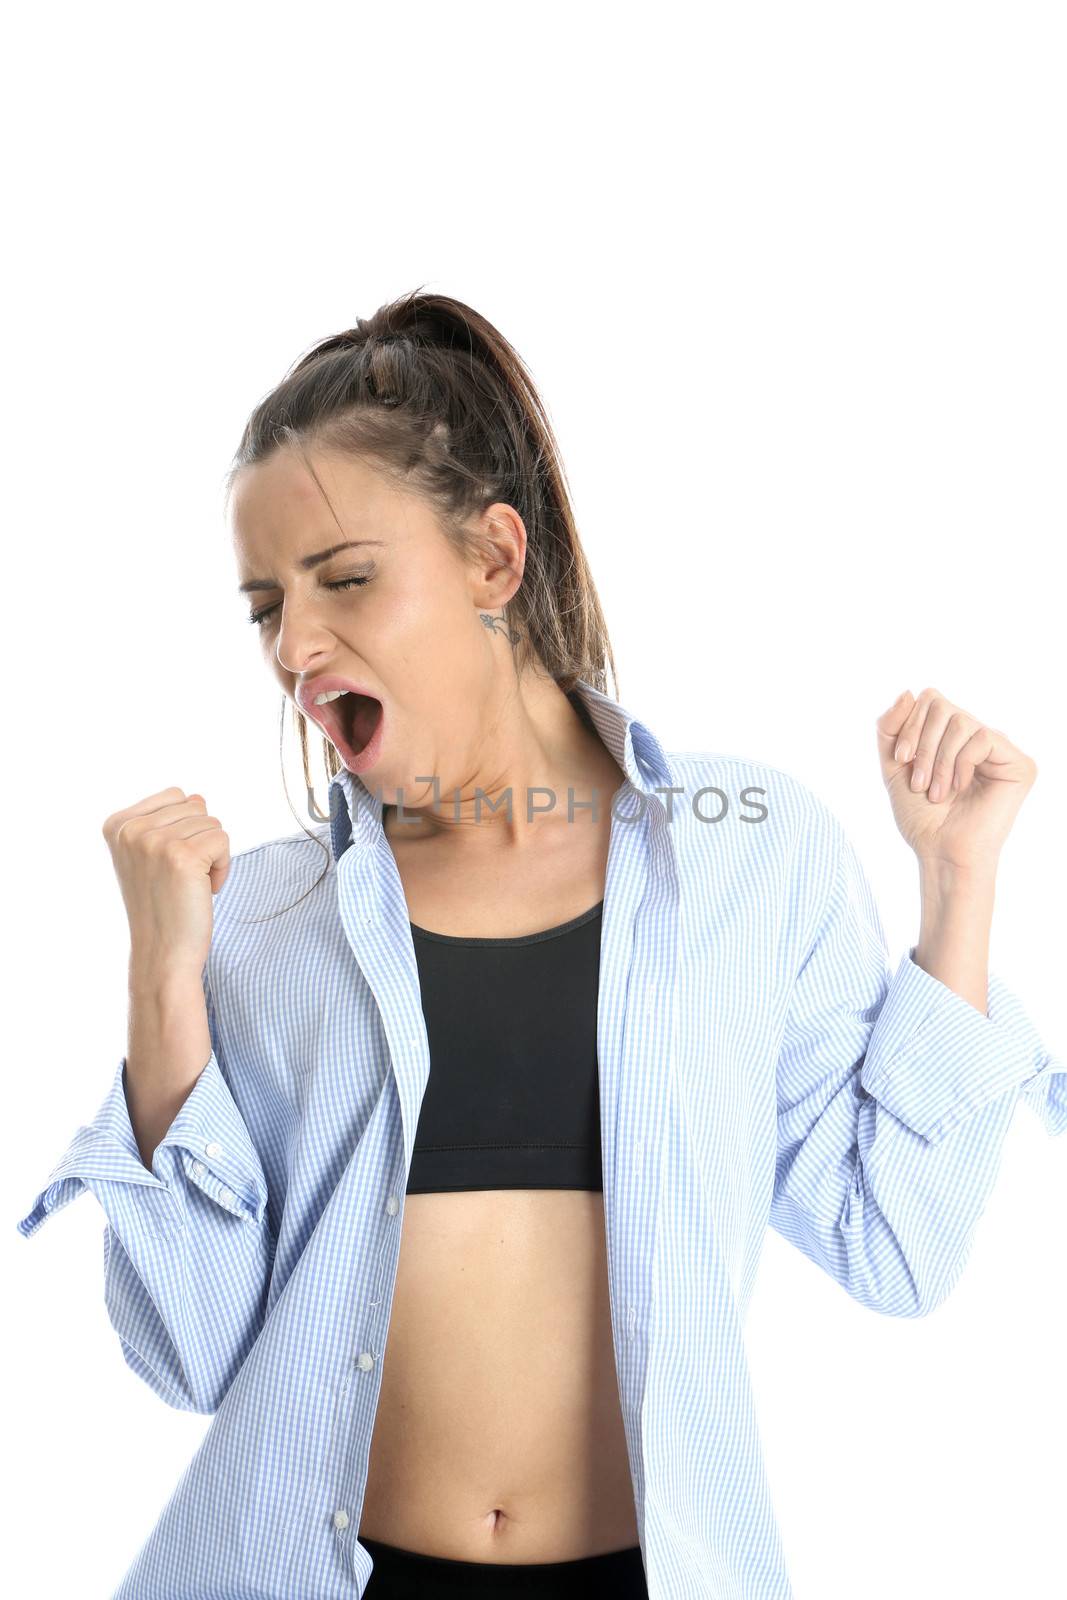 Model Released. Woman Yawning by Whiteboxmedia